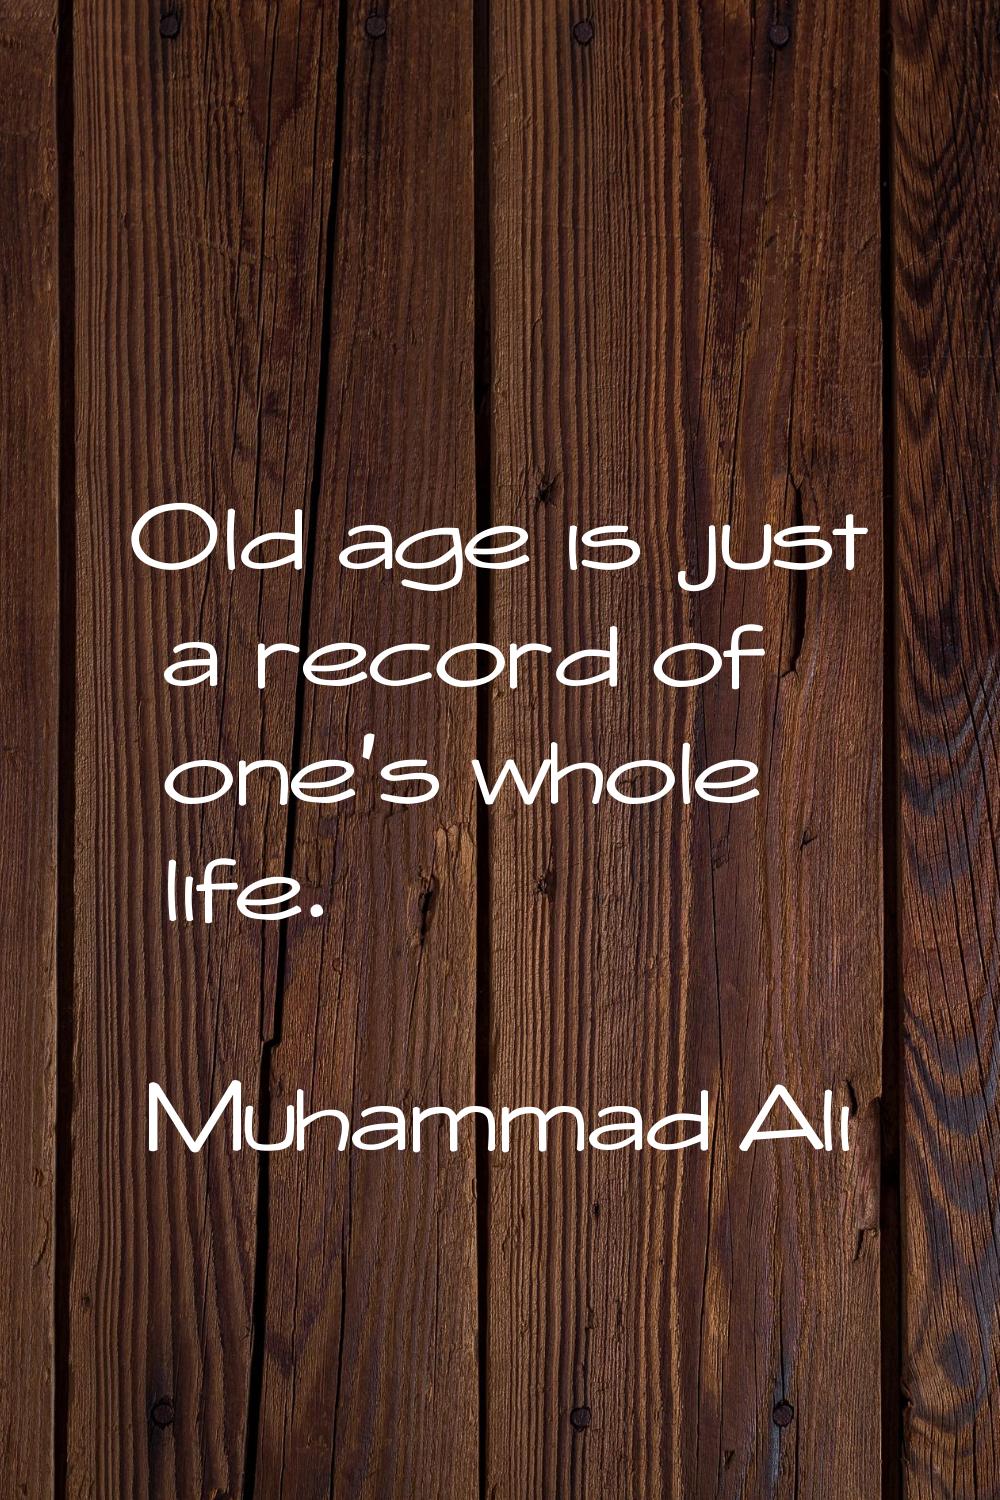 Old age is just a record of one's whole life.